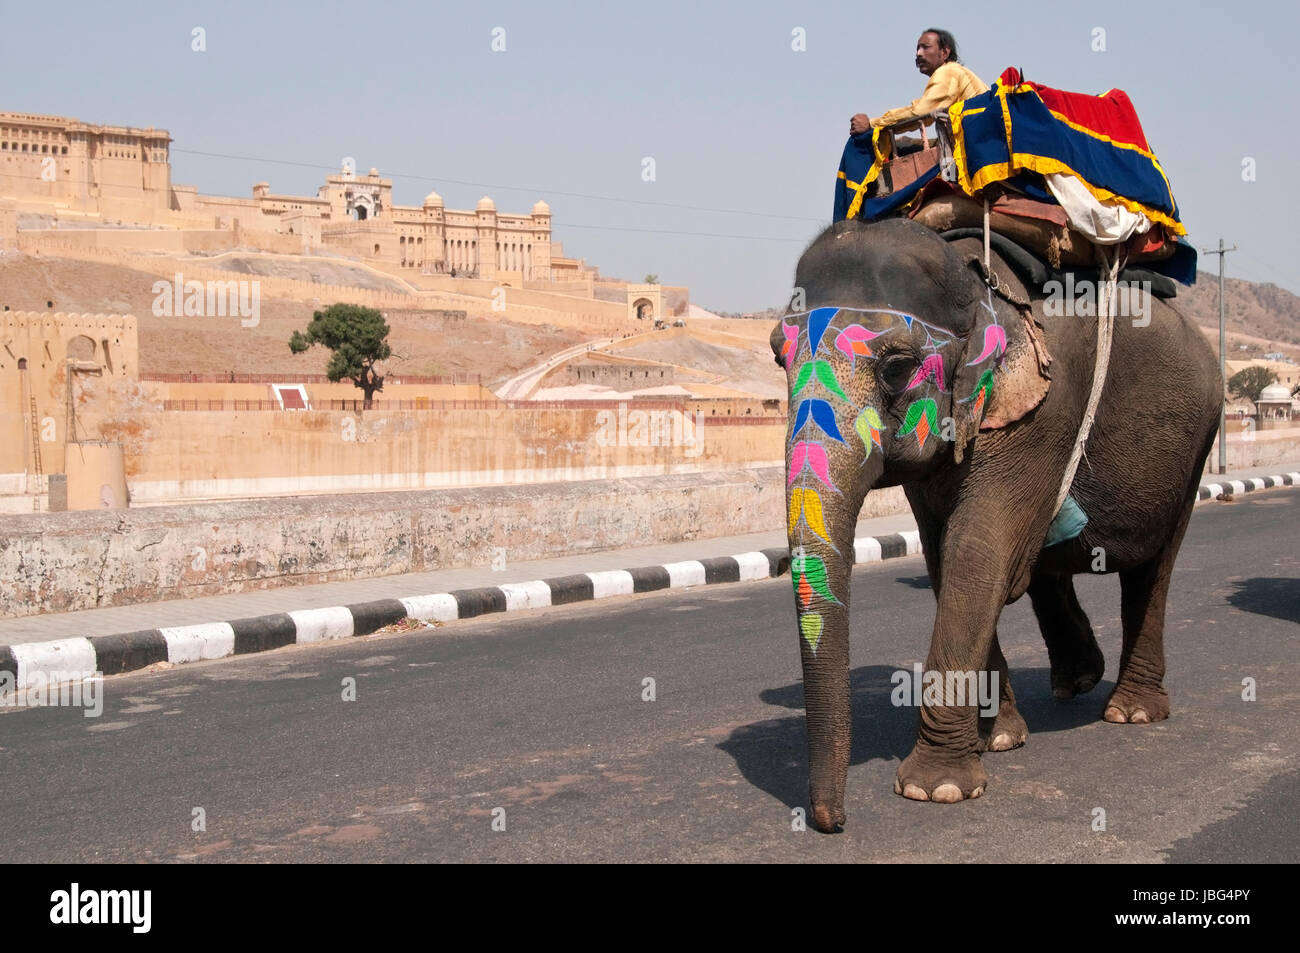 Elephant with decorated head and trunk walking along the road at Amber Fort on the outskirts of Jaipur in Rajasthan, India. Stock Photo